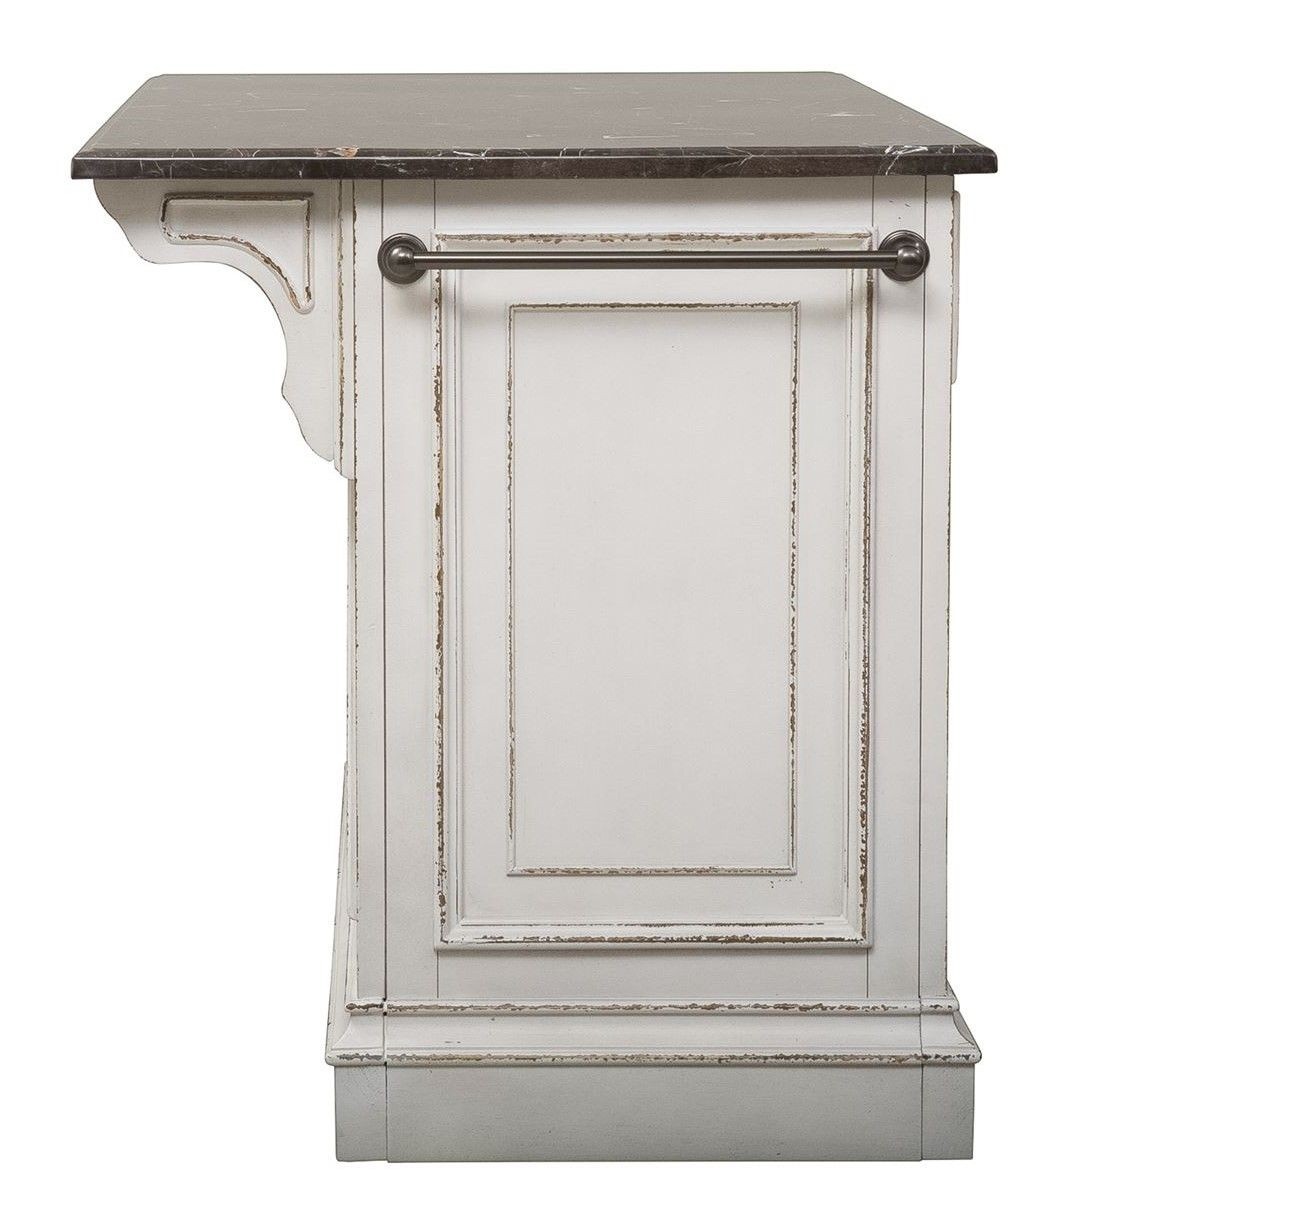 Magnolia traditional kitchen island with granite top in 1